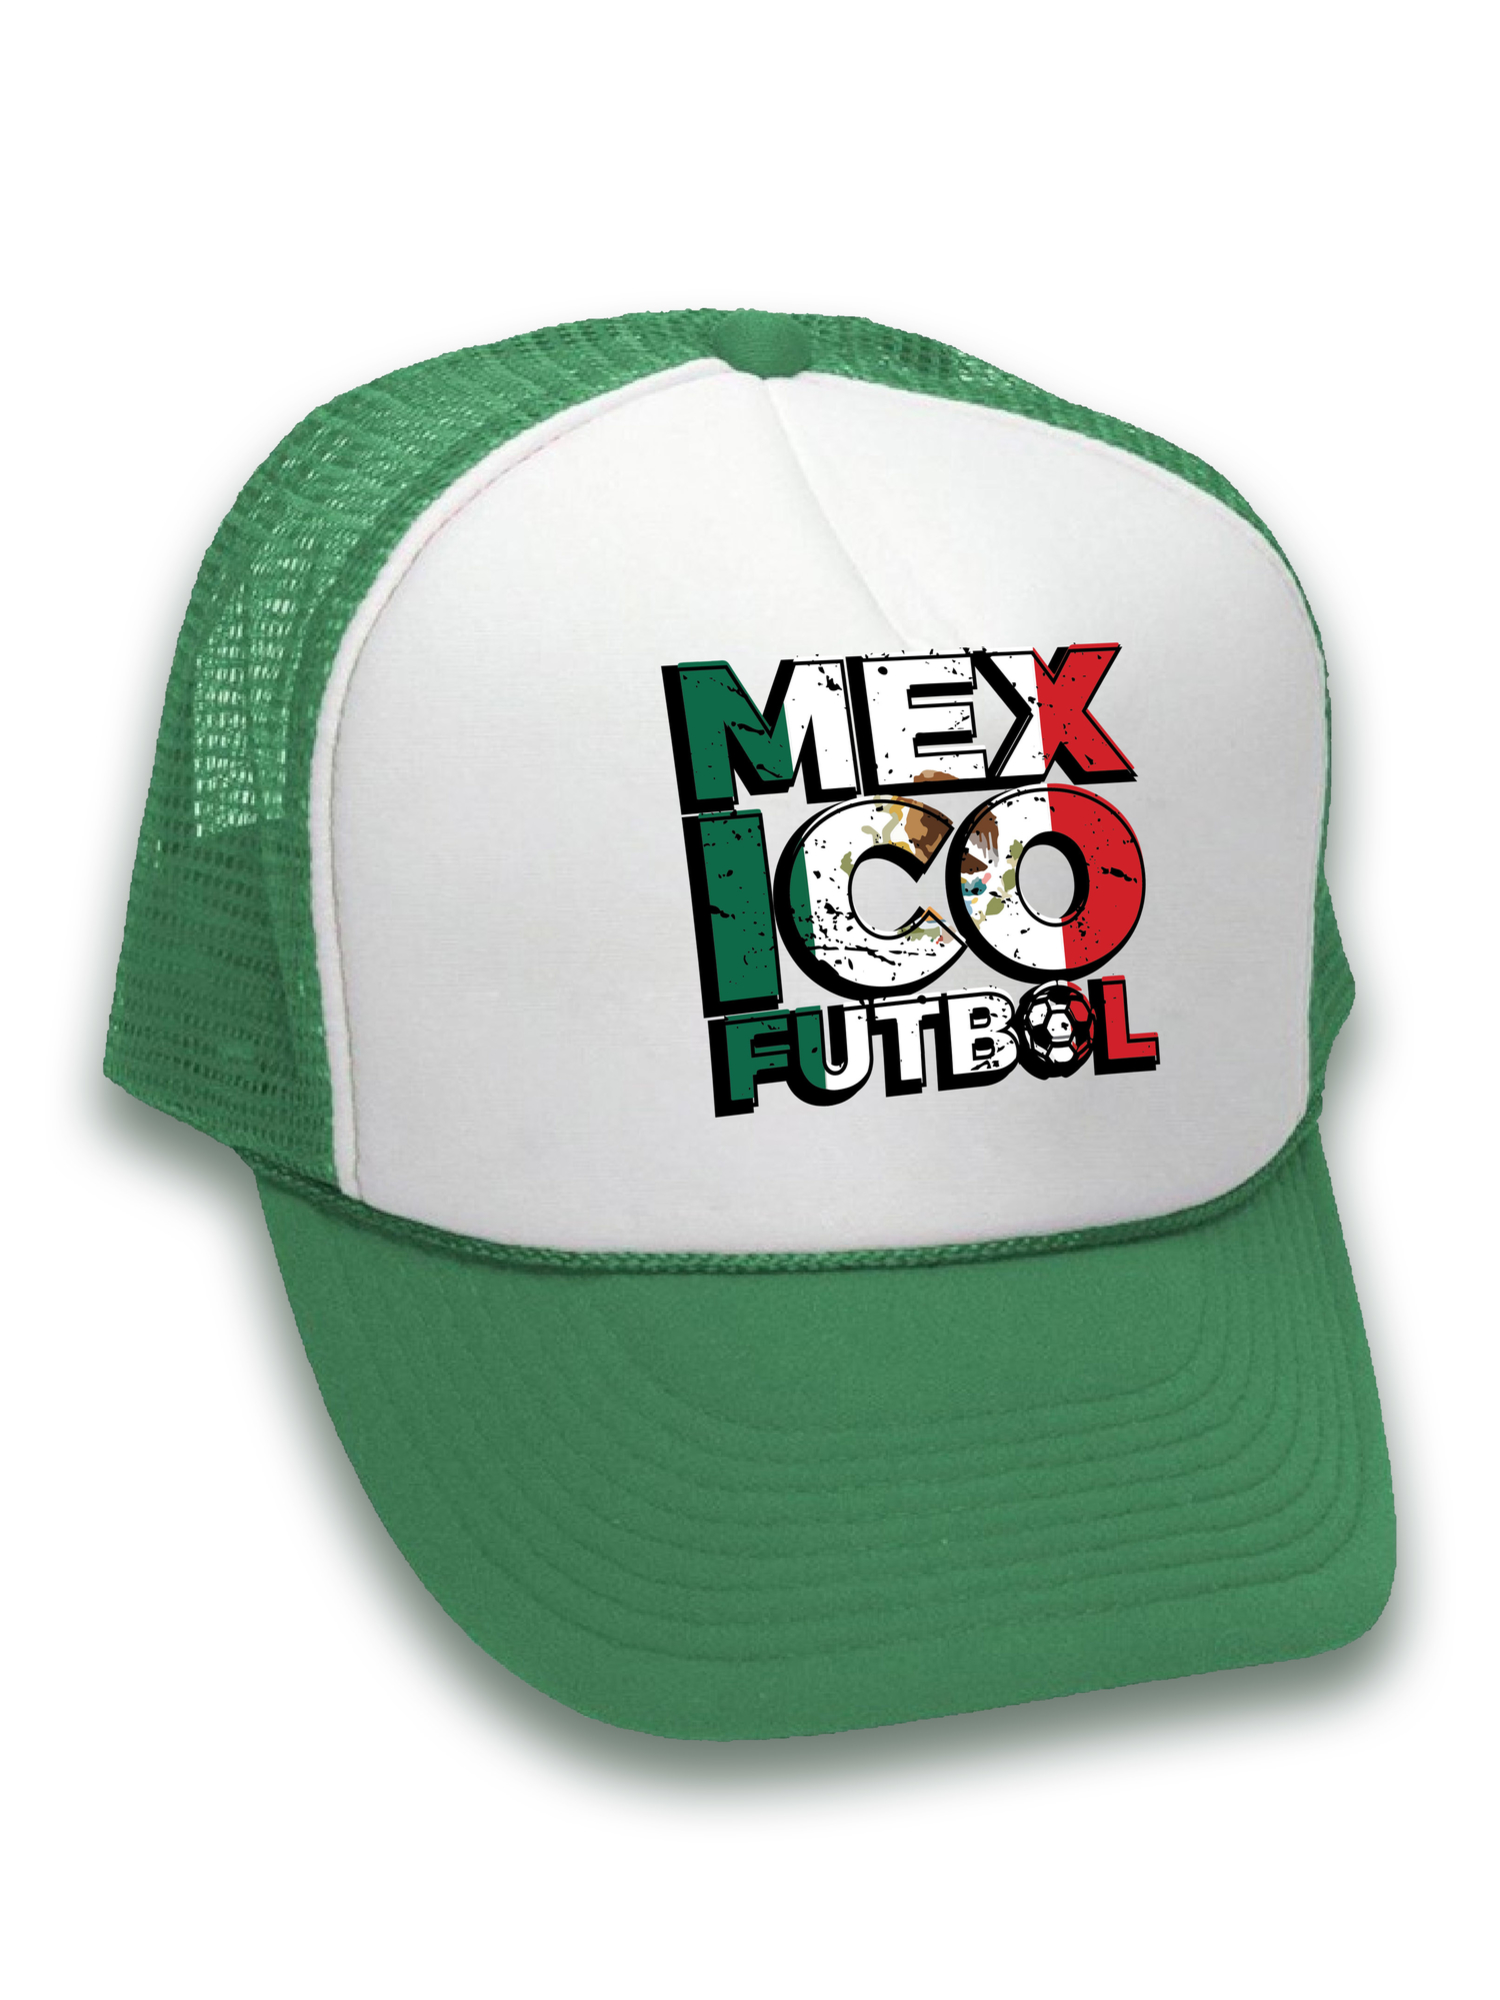 Awkward Styles Mexico Futbol Hat Mexico Trucker Hats for Men and Women Hat Gifts from Mexico Mexican Soccer Cap Mexican Hats Unisex Mexico Snapback Hat Mexico 2018 Trucker Hats Mexico Football Hat - image 2 of 6